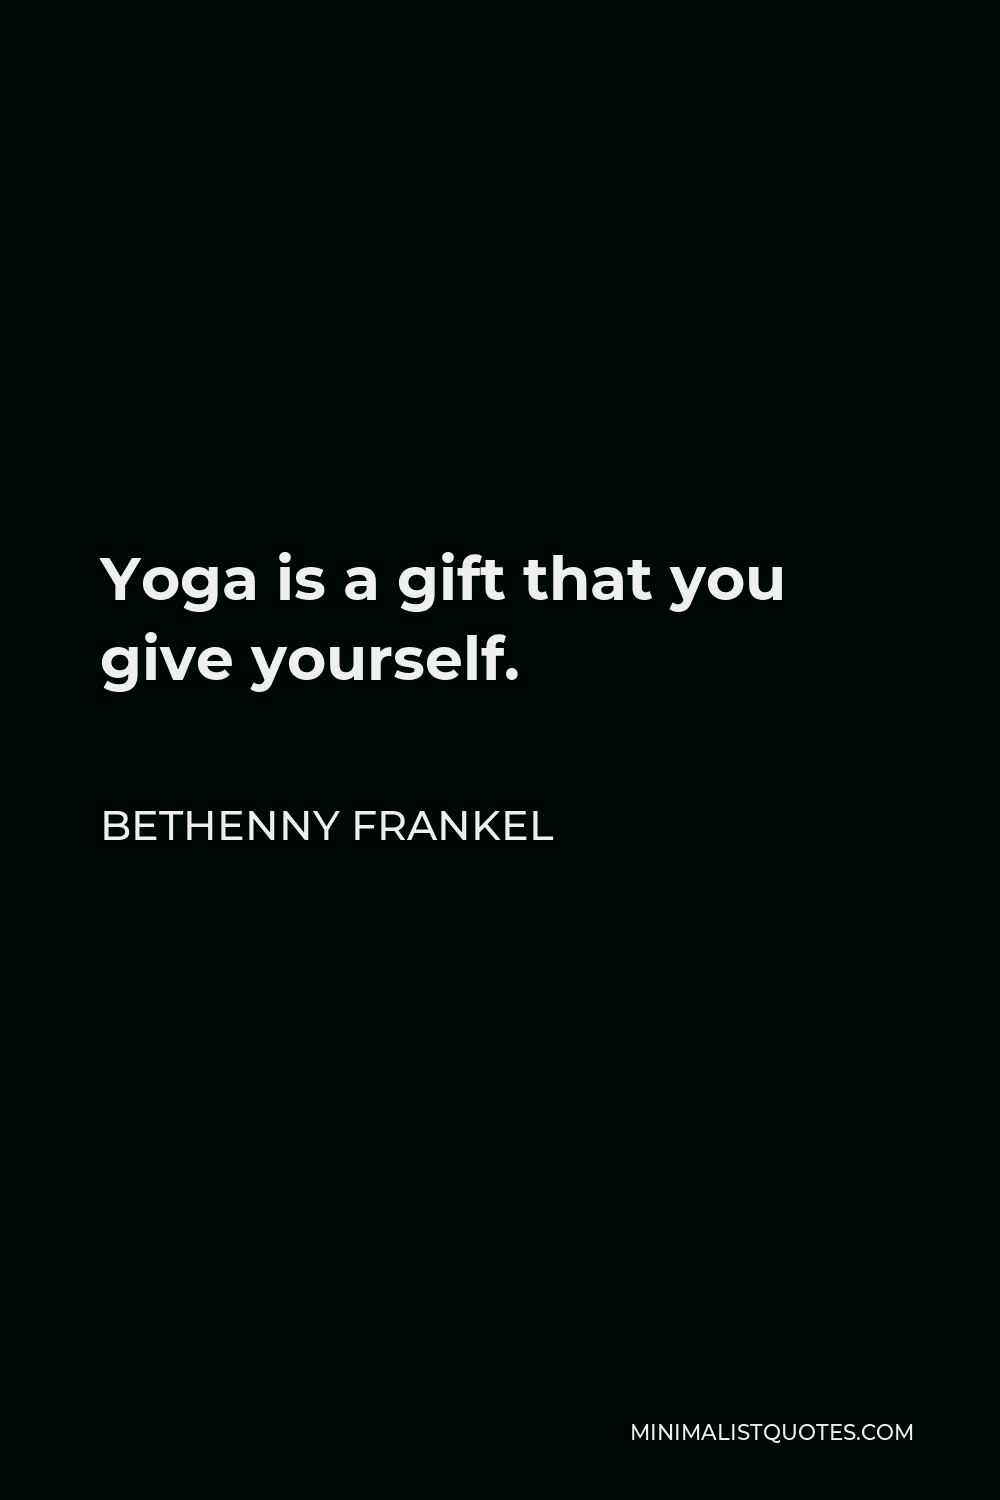 Bethenny Frankel Quote - Yoga is a gift that you give yourself.